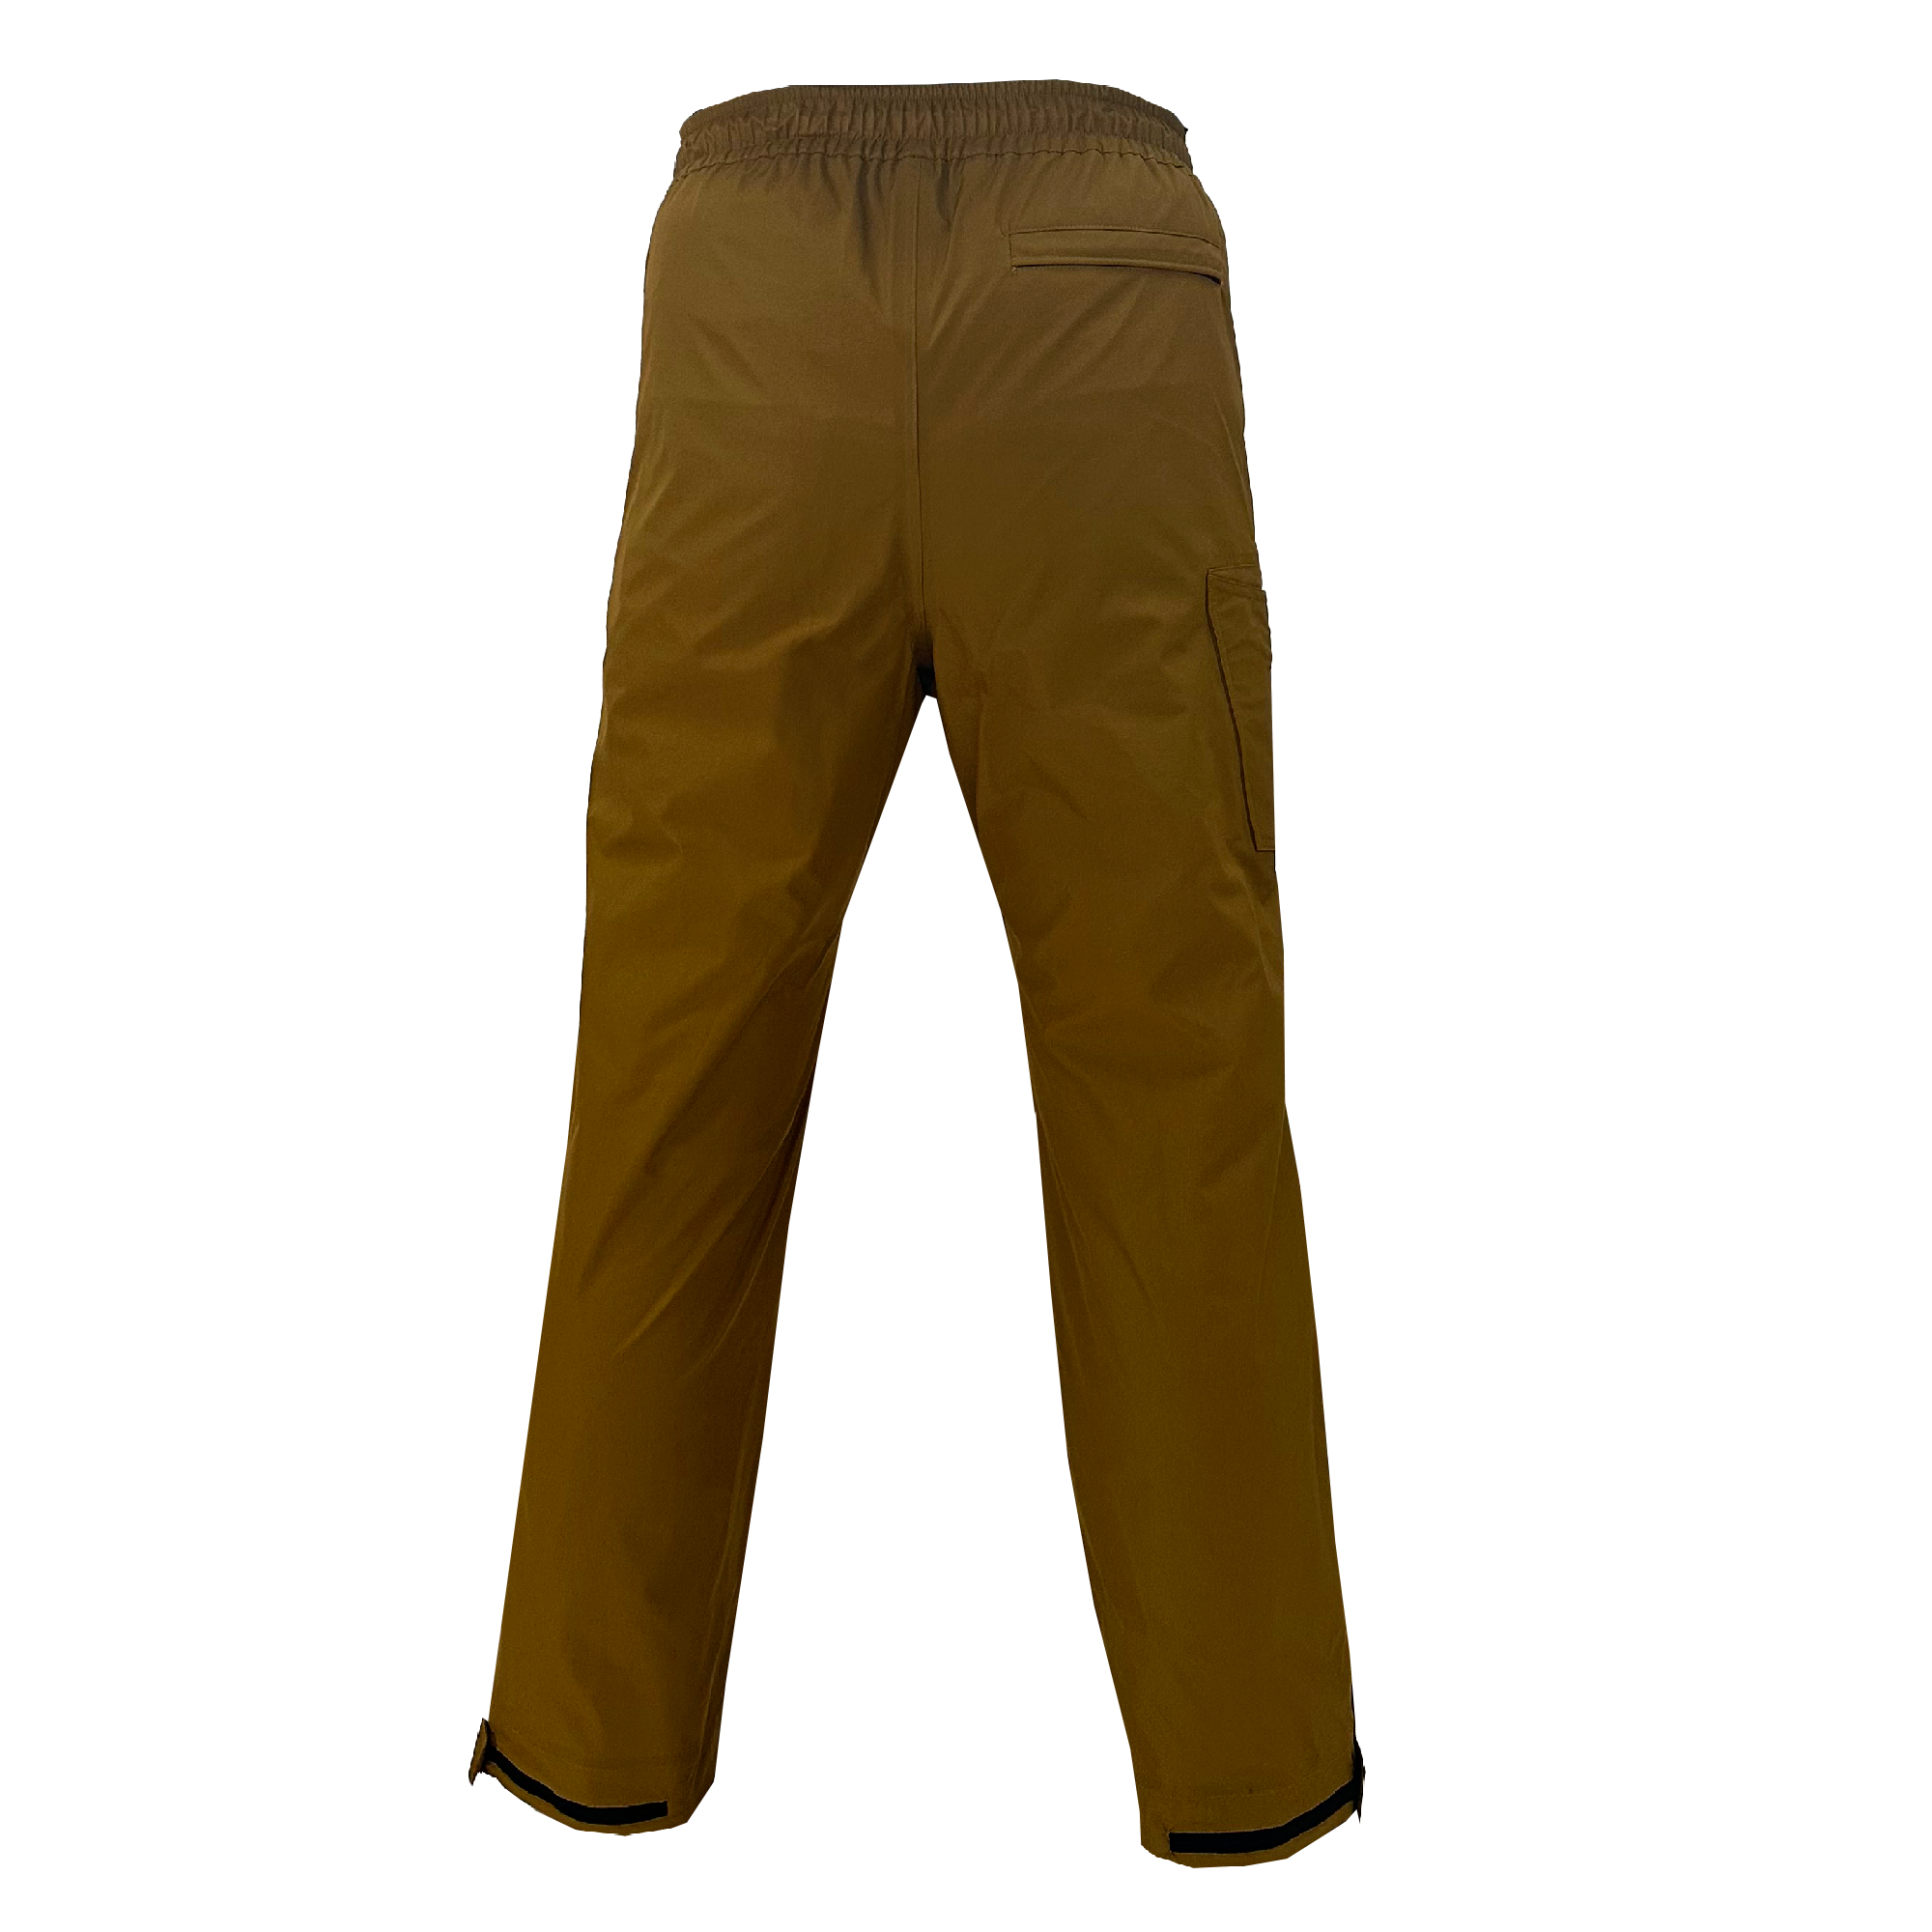 Baffin Outer Shell Pants - Mustard